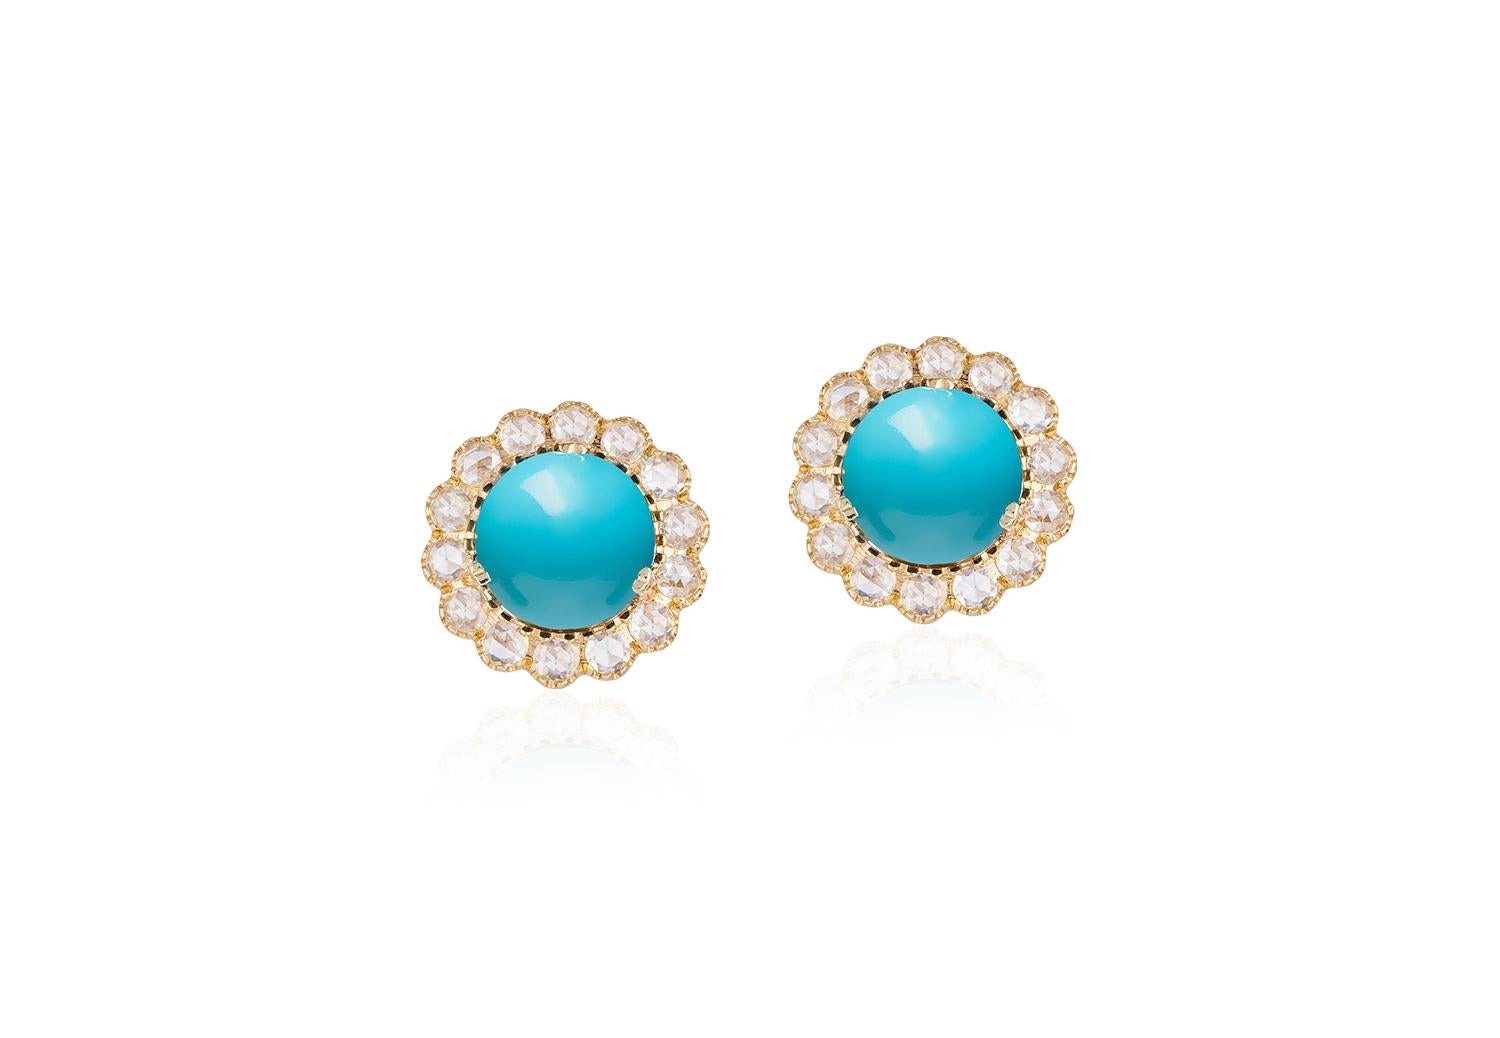 Turquoise Cabochon Earrings in 18K Yellow Gold with Rose Cuts Diamonds, from 'Rock 'N Roll' Collection 

Stone Size: 12 mm 

Diamonds: G-H / VS, Approx. Wt.: 1.23 Carats